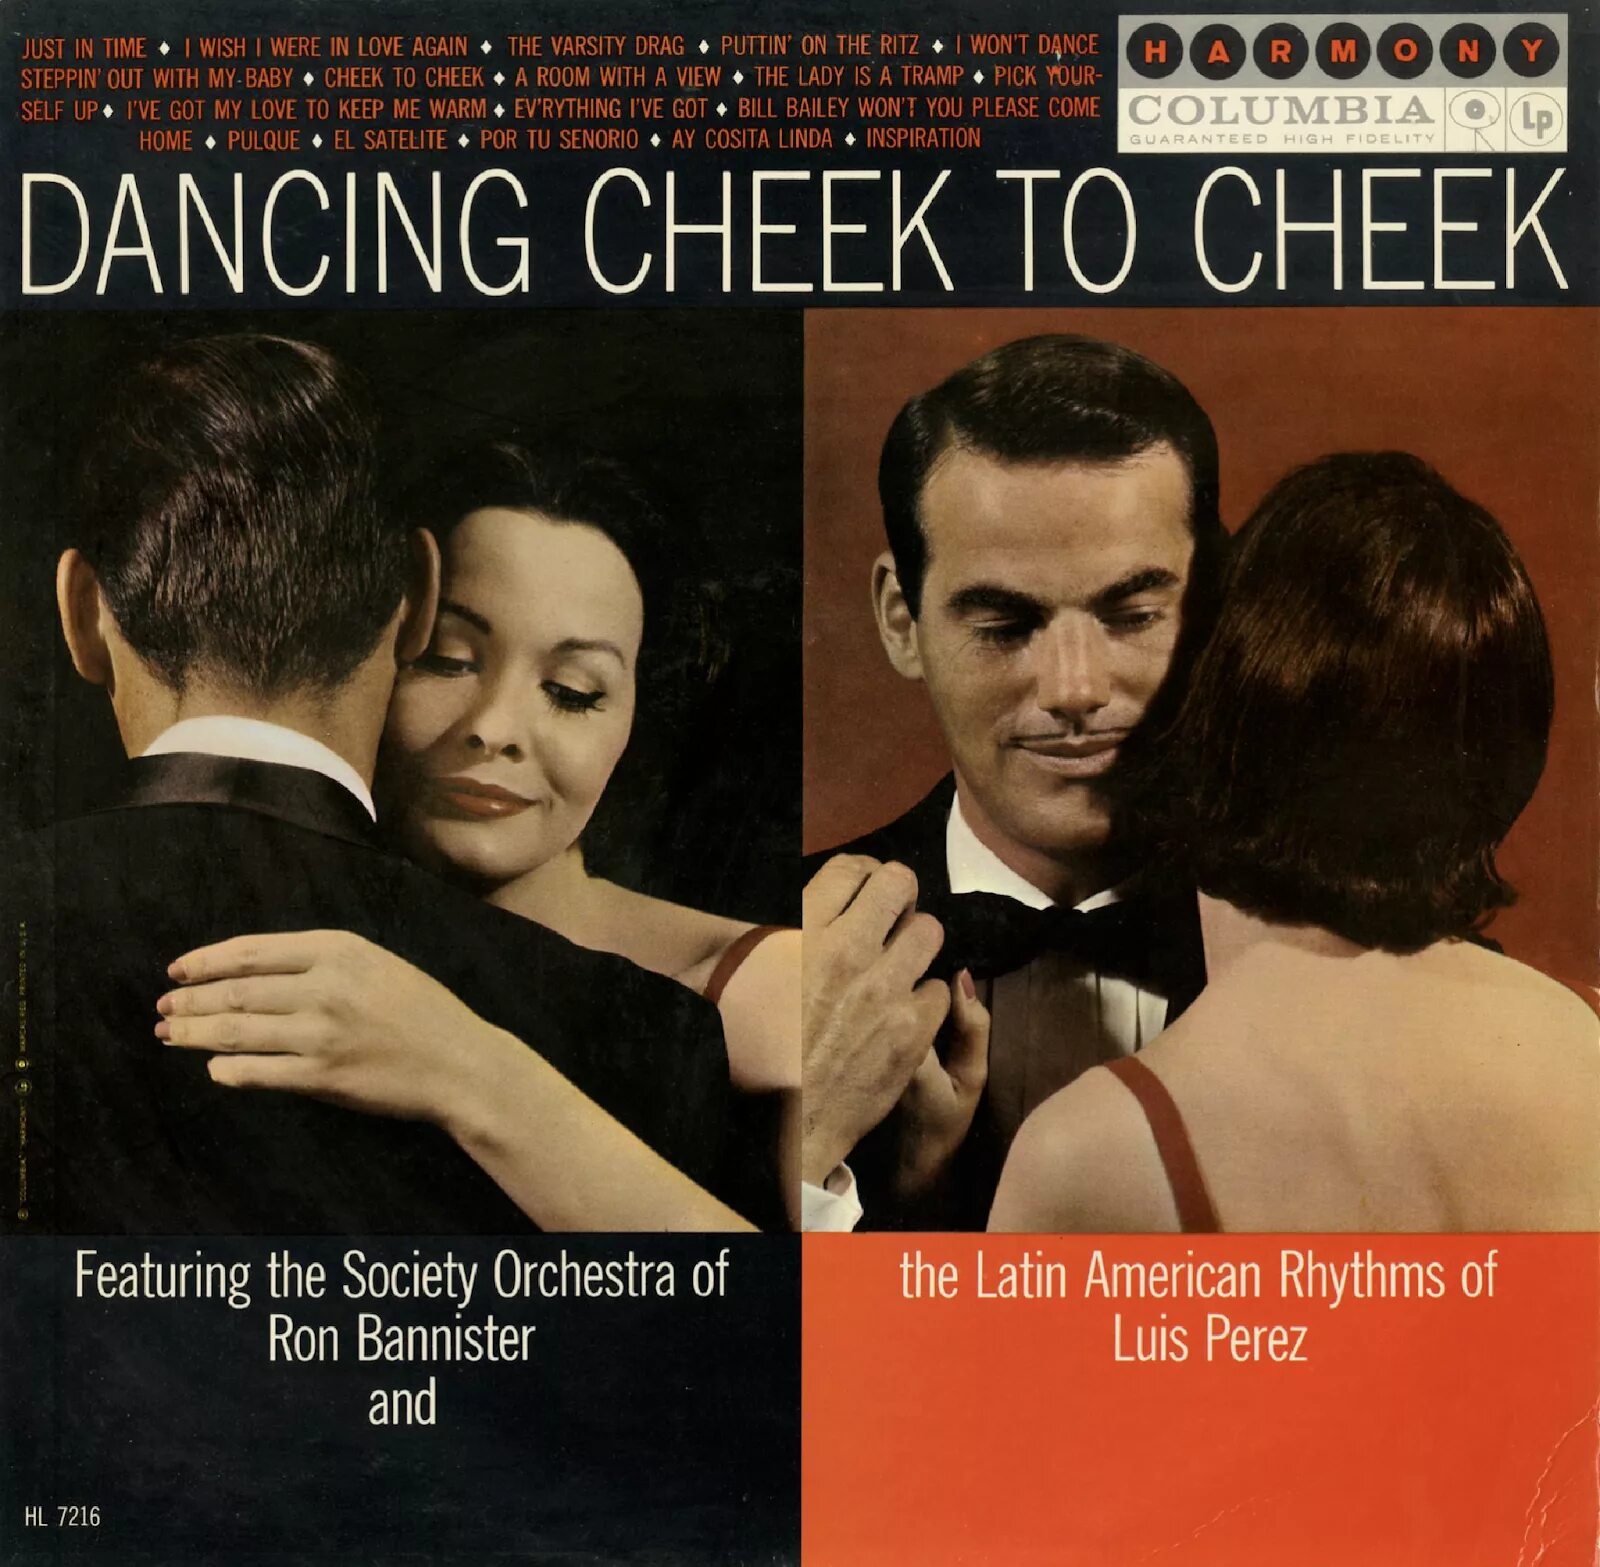 Dancing Cheek to Cheek. Dancing Cheek to Cheek фильм. Dominic frontiere and his Orchestra. Cheek to cheek